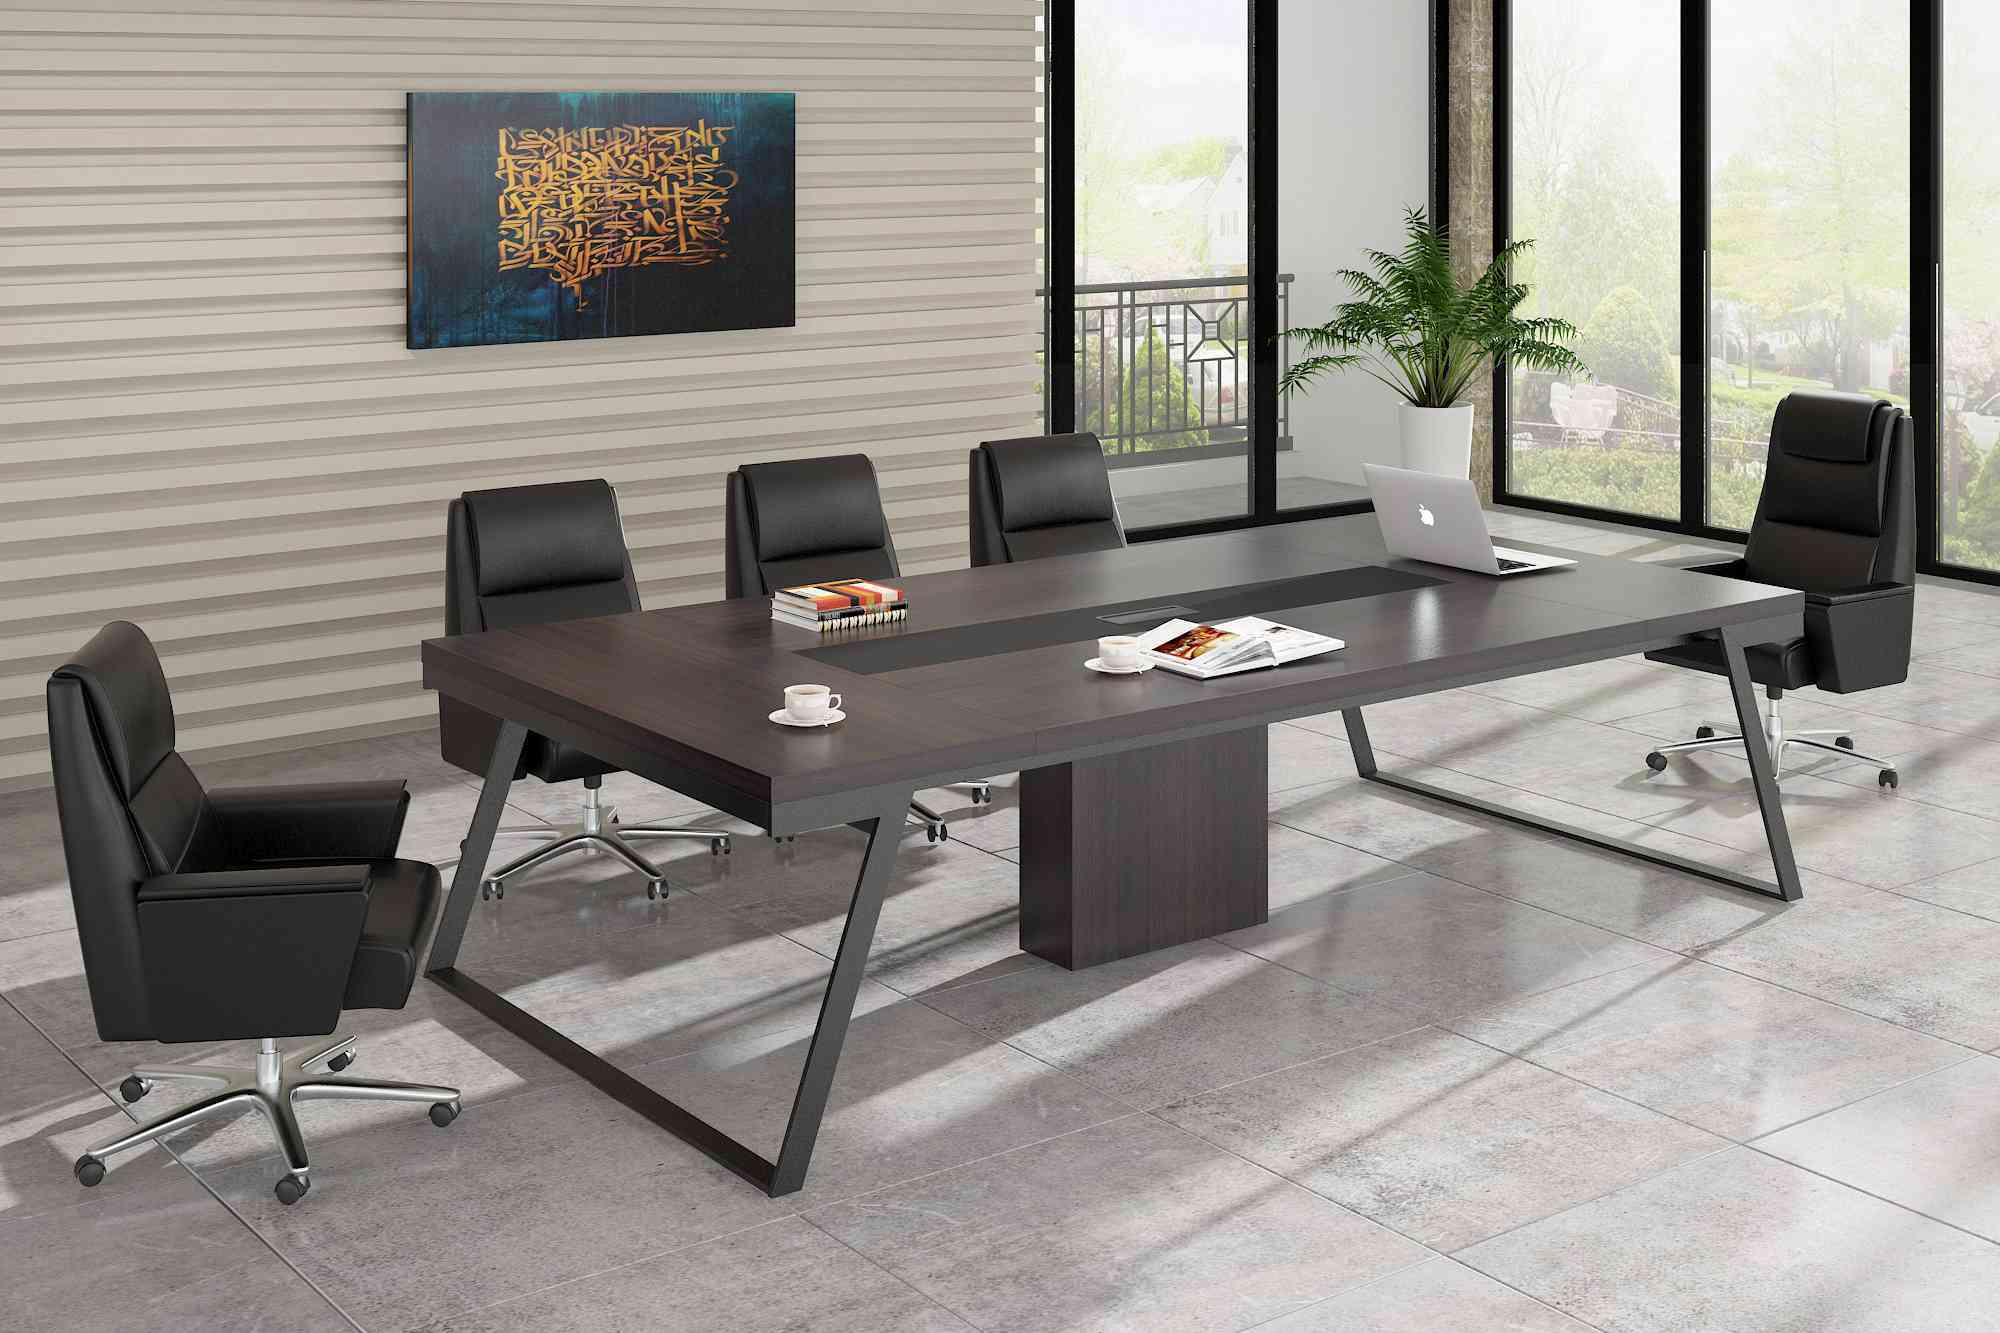 How to maintain office furniture meeting desk?